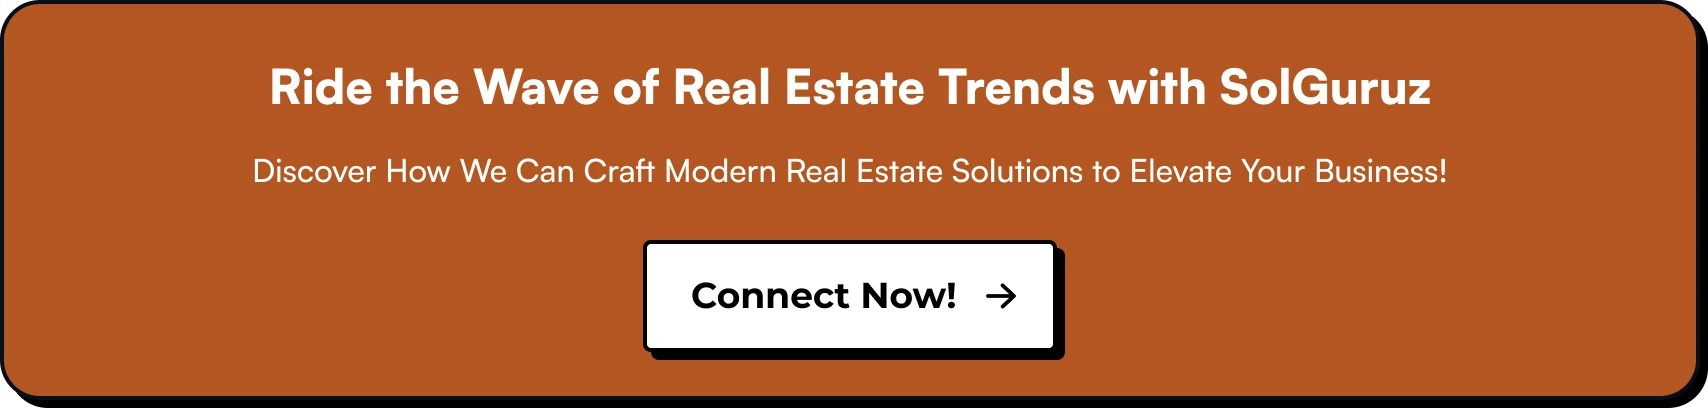 Ride the Wave of Real Estate Technology Trends with SolGuruz